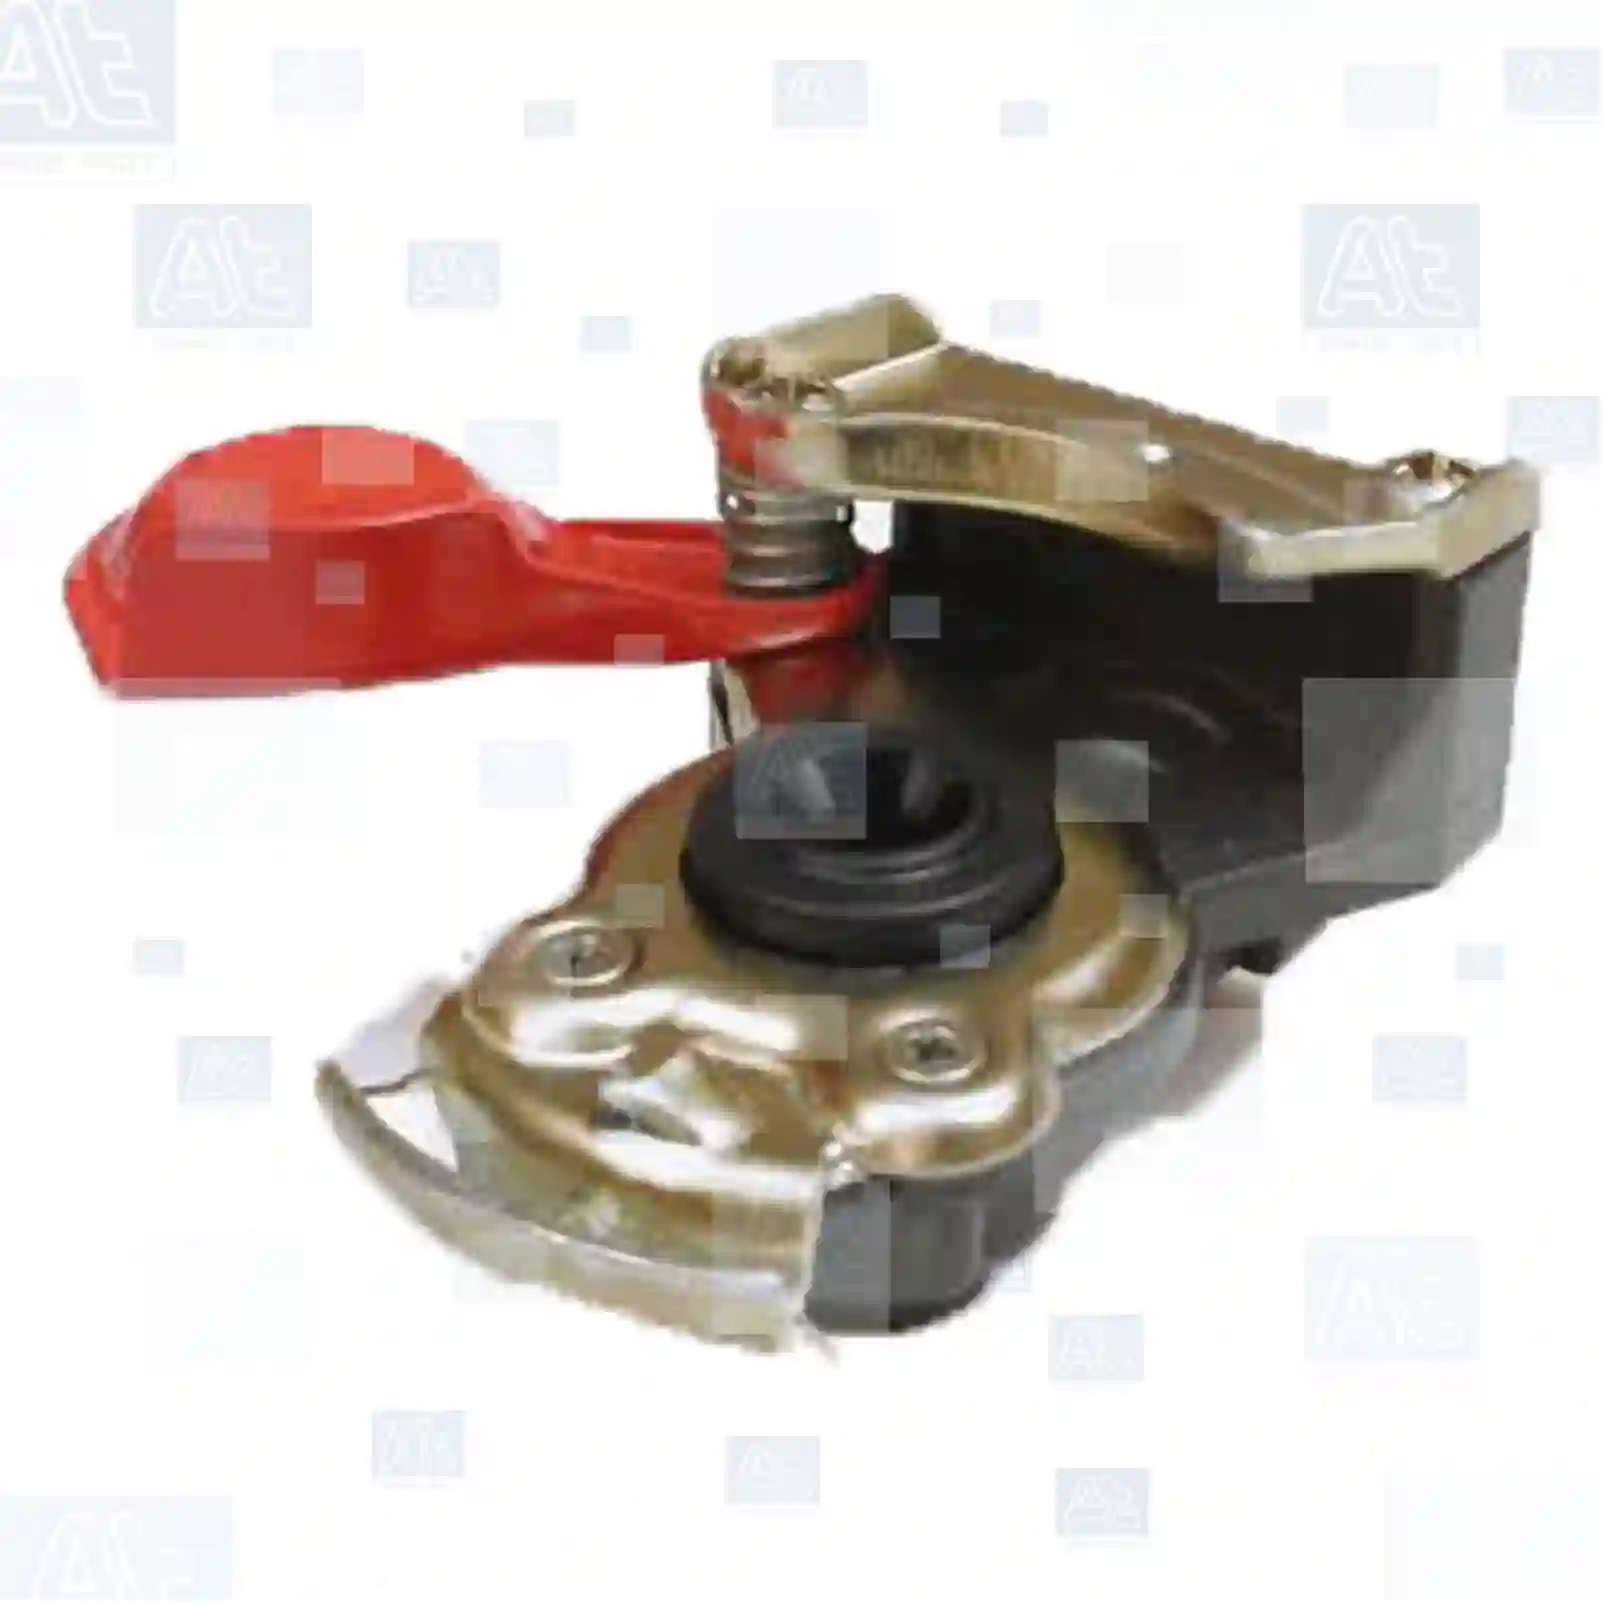 Palm coupling, automatic shutter, red lid, 77714420, 3141447R1, 0632565, 0640360, 1504961, 1522312, 632565, 640360, ACU5698, ACU8042, 04322997, F250880020010, 02515210, 02515442, 02516900, 02521367, 04715224, 04715225, 04841036, 04983302, 42070650, 5000607008, A0039300, AFA4271018, CF3519103, 01121695, 01125499, 02379541, 02489266, 02515052, 02515298, 02515436, 02516898, 02521369, 04322997, 04323303, 04670845, 04715226, 04841035, 2515298, 2515436, 2516898, 2521369, 41285053, 41285054, 42008625, 42070652, 42088851, 42088852, 4323303, 4715226, 4841035, 504186403, 5010260537, 61578023, 71005207, AL68573, 505806557, 5058065570, 502915701, 502935008, 502935014, 502945308, 04523000310, 09522002210, 51512206095, 51512206110, 81512206010, 81512206012, 81512206017, 81512206026, 81512206031, 81512206045, 81512206068, 81512206078, 81512206094, 81512206095, 81512206097, 81512206102, 81512206110, 81512206111, 85500011983, 85500013214, 85500014329, 0004291630, 0004293930, 0004294830, 0004295830, 0004296130, 0004296730, 0004297530, 0004298030, 0004298630, 0004299730, 0004295530, 0024322040, 0024322049, 0024322050, 110229702, 112233100, 462008, 46202221600, 0024322040, 5000435797, 5000435826, 5000438152, 5000442713, 5000468241, 5000607007, 5000789789, 5000789790, 5000877207, 5010260410, 5021170412, 5430000849, 7700051791, 7700051795, 7701363507, 1010009, 1584598, 1912363, 318158, 051404, 8285280000, 8285392000, 1102219300, 11023809, 1567995, 1584598, 1584958, 20467883, 6888509, 70307440, 795042, 8157983, 2V5611337, 613607343, ZG50550-0008 ||  77714420 At Spare Part | Engine, Accelerator Pedal, Camshaft, Connecting Rod, Crankcase, Crankshaft, Cylinder Head, Engine Suspension Mountings, Exhaust Manifold, Exhaust Gas Recirculation, Filter Kits, Flywheel Housing, General Overhaul Kits, Engine, Intake Manifold, Oil Cleaner, Oil Cooler, Oil Filter, Oil Pump, Oil Sump, Piston & Liner, Sensor & Switch, Timing Case, Turbocharger, Cooling System, Belt Tensioner, Coolant Filter, Coolant Pipe, Corrosion Prevention Agent, Drive, Expansion Tank, Fan, Intercooler, Monitors & Gauges, Radiator, Thermostat, V-Belt / Timing belt, Water Pump, Fuel System, Electronical Injector Unit, Feed Pump, Fuel Filter, cpl., Fuel Gauge Sender,  Fuel Line, Fuel Pump, Fuel Tank, Injection Line Kit, Injection Pump, Exhaust System, Clutch & Pedal, Gearbox, Propeller Shaft, Axles, Brake System, Hubs & Wheels, Suspension, Leaf Spring, Universal Parts / Accessories, Steering, Electrical System, Cabin Palm coupling, automatic shutter, red lid, 77714420, 3141447R1, 0632565, 0640360, 1504961, 1522312, 632565, 640360, ACU5698, ACU8042, 04322997, F250880020010, 02515210, 02515442, 02516900, 02521367, 04715224, 04715225, 04841036, 04983302, 42070650, 5000607008, A0039300, AFA4271018, CF3519103, 01121695, 01125499, 02379541, 02489266, 02515052, 02515298, 02515436, 02516898, 02521369, 04322997, 04323303, 04670845, 04715226, 04841035, 2515298, 2515436, 2516898, 2521369, 41285053, 41285054, 42008625, 42070652, 42088851, 42088852, 4323303, 4715226, 4841035, 504186403, 5010260537, 61578023, 71005207, AL68573, 505806557, 5058065570, 502915701, 502935008, 502935014, 502945308, 04523000310, 09522002210, 51512206095, 51512206110, 81512206010, 81512206012, 81512206017, 81512206026, 81512206031, 81512206045, 81512206068, 81512206078, 81512206094, 81512206095, 81512206097, 81512206102, 81512206110, 81512206111, 85500011983, 85500013214, 85500014329, 0004291630, 0004293930, 0004294830, 0004295830, 0004296130, 0004296730, 0004297530, 0004298030, 0004298630, 0004299730, 0004295530, 0024322040, 0024322049, 0024322050, 110229702, 112233100, 462008, 46202221600, 0024322040, 5000435797, 5000435826, 5000438152, 5000442713, 5000468241, 5000607007, 5000789789, 5000789790, 5000877207, 5010260410, 5021170412, 5430000849, 7700051791, 7700051795, 7701363507, 1010009, 1584598, 1912363, 318158, 051404, 8285280000, 8285392000, 1102219300, 11023809, 1567995, 1584598, 1584958, 20467883, 6888509, 70307440, 795042, 8157983, 2V5611337, 613607343, ZG50550-0008 ||  77714420 At Spare Part | Engine, Accelerator Pedal, Camshaft, Connecting Rod, Crankcase, Crankshaft, Cylinder Head, Engine Suspension Mountings, Exhaust Manifold, Exhaust Gas Recirculation, Filter Kits, Flywheel Housing, General Overhaul Kits, Engine, Intake Manifold, Oil Cleaner, Oil Cooler, Oil Filter, Oil Pump, Oil Sump, Piston & Liner, Sensor & Switch, Timing Case, Turbocharger, Cooling System, Belt Tensioner, Coolant Filter, Coolant Pipe, Corrosion Prevention Agent, Drive, Expansion Tank, Fan, Intercooler, Monitors & Gauges, Radiator, Thermostat, V-Belt / Timing belt, Water Pump, Fuel System, Electronical Injector Unit, Feed Pump, Fuel Filter, cpl., Fuel Gauge Sender,  Fuel Line, Fuel Pump, Fuel Tank, Injection Line Kit, Injection Pump, Exhaust System, Clutch & Pedal, Gearbox, Propeller Shaft, Axles, Brake System, Hubs & Wheels, Suspension, Leaf Spring, Universal Parts / Accessories, Steering, Electrical System, Cabin